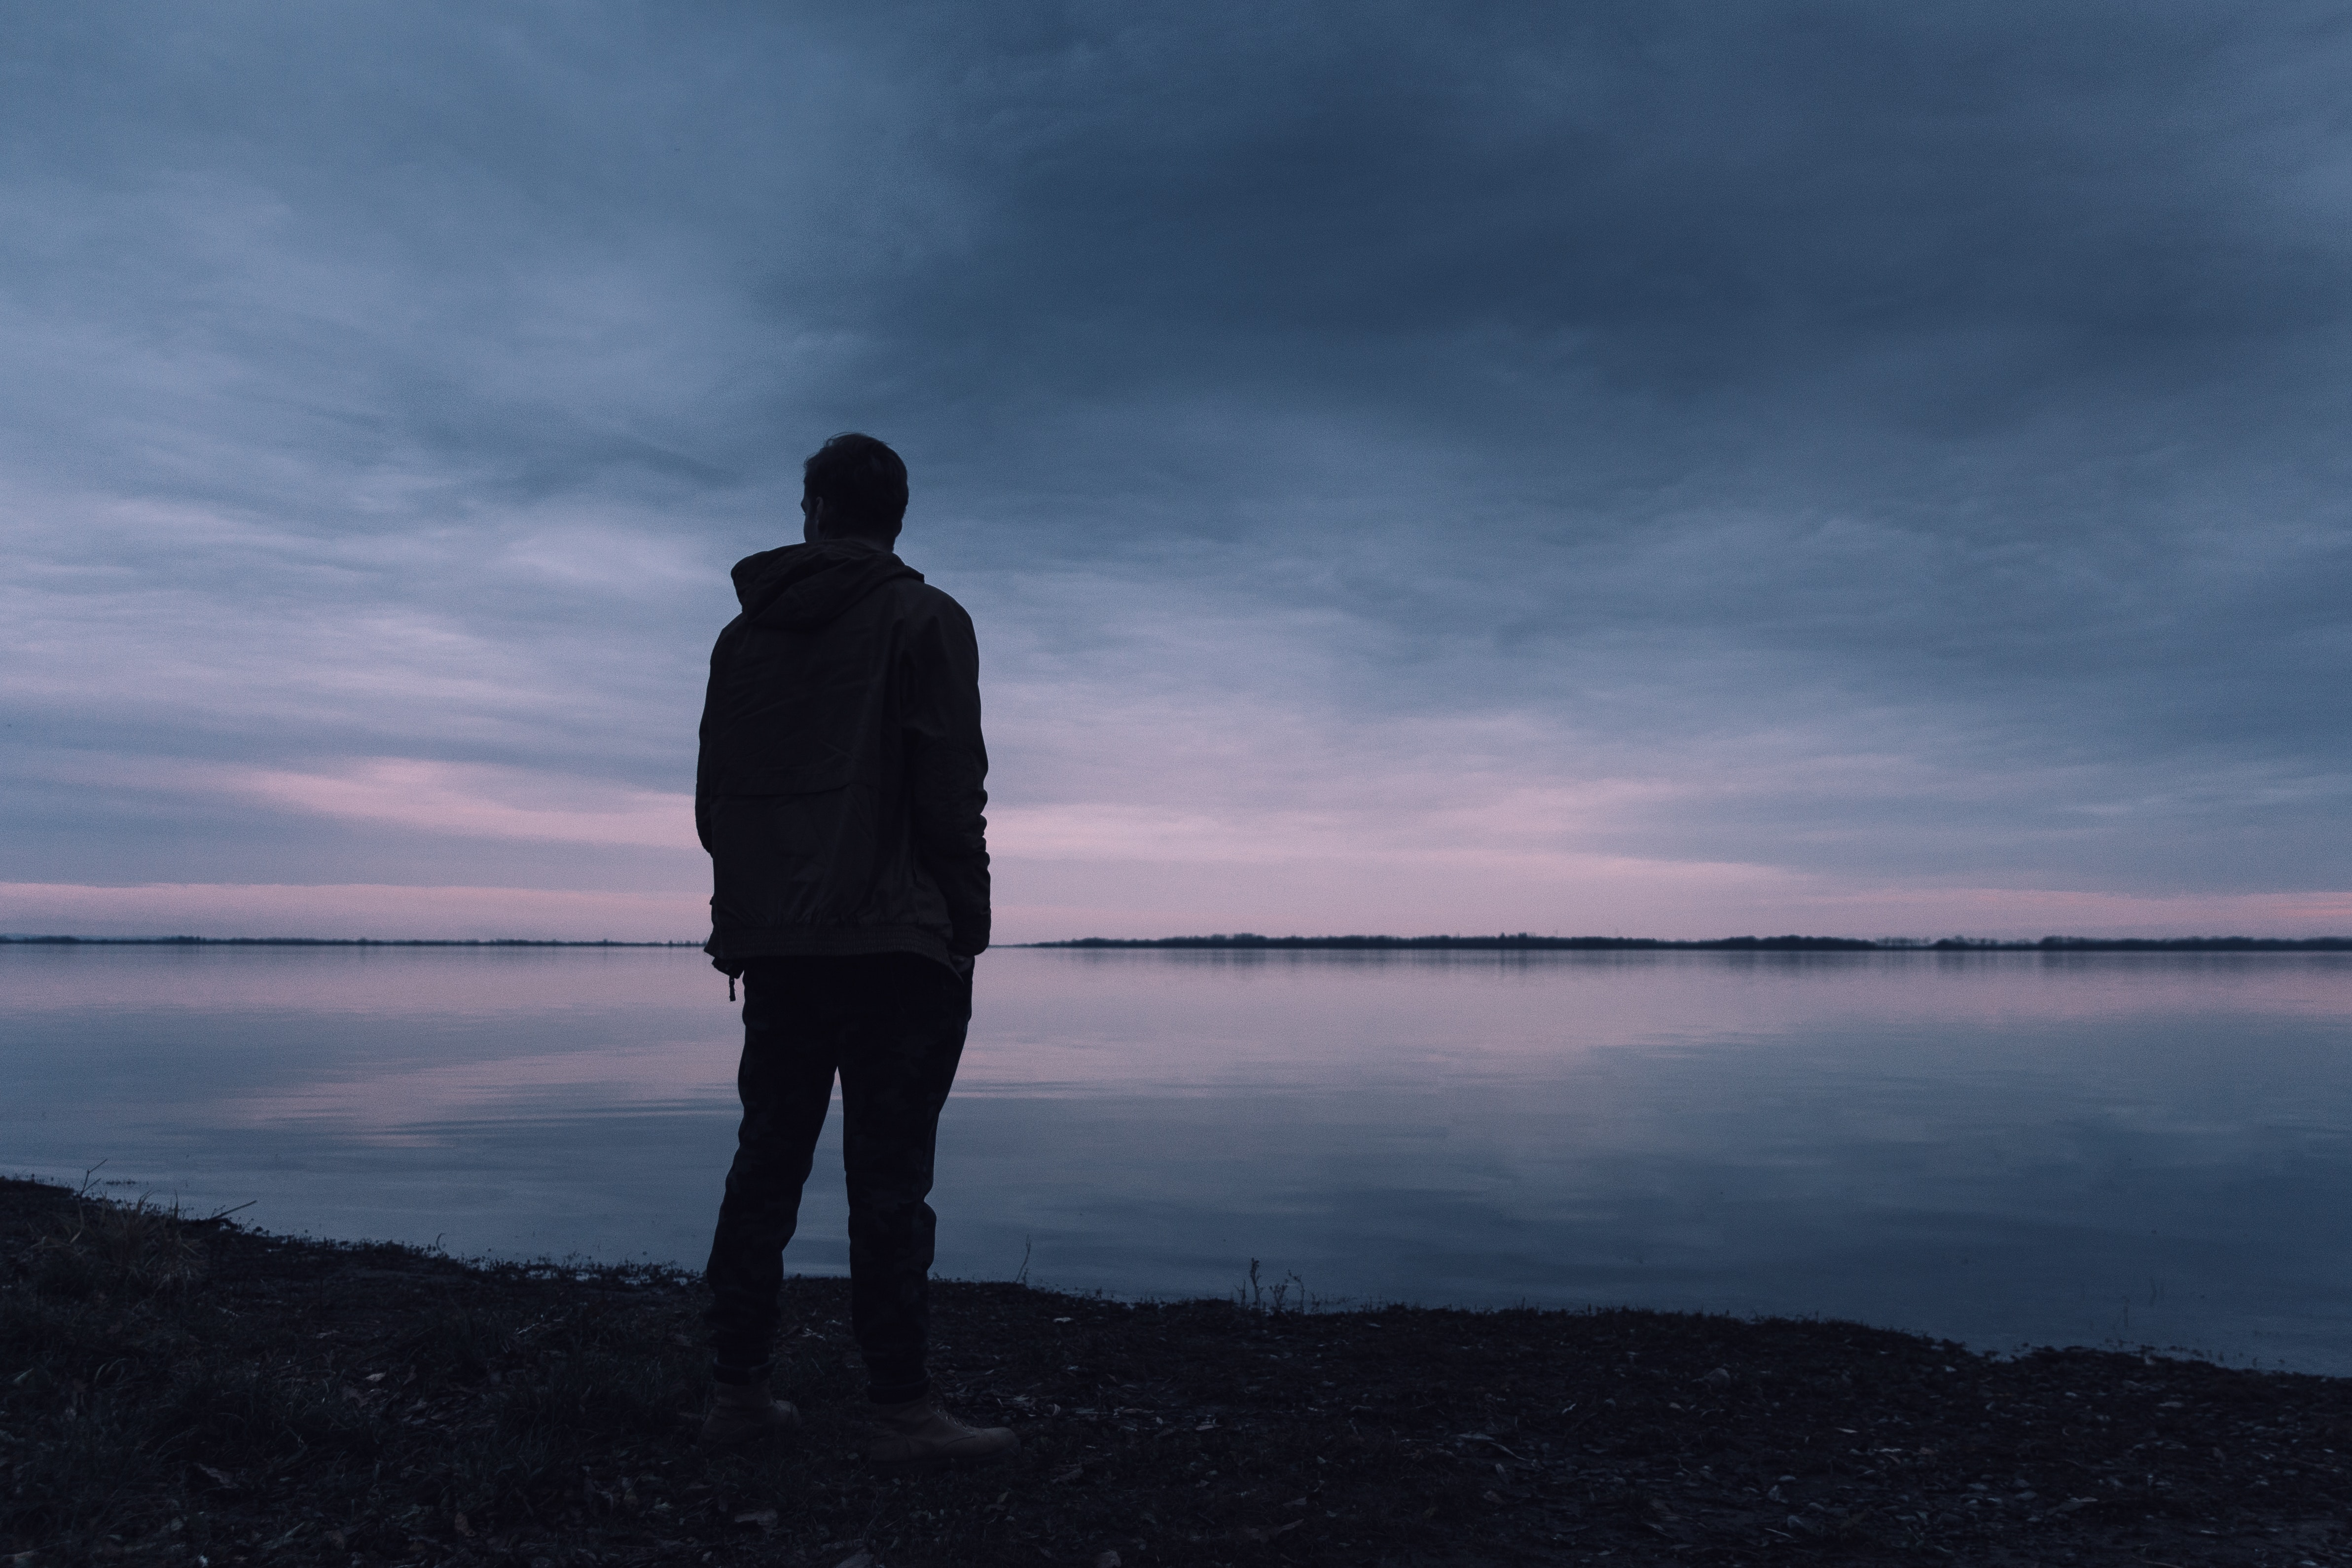 The silhouette of a man overlooking a lake in the early morning while it is still dark.